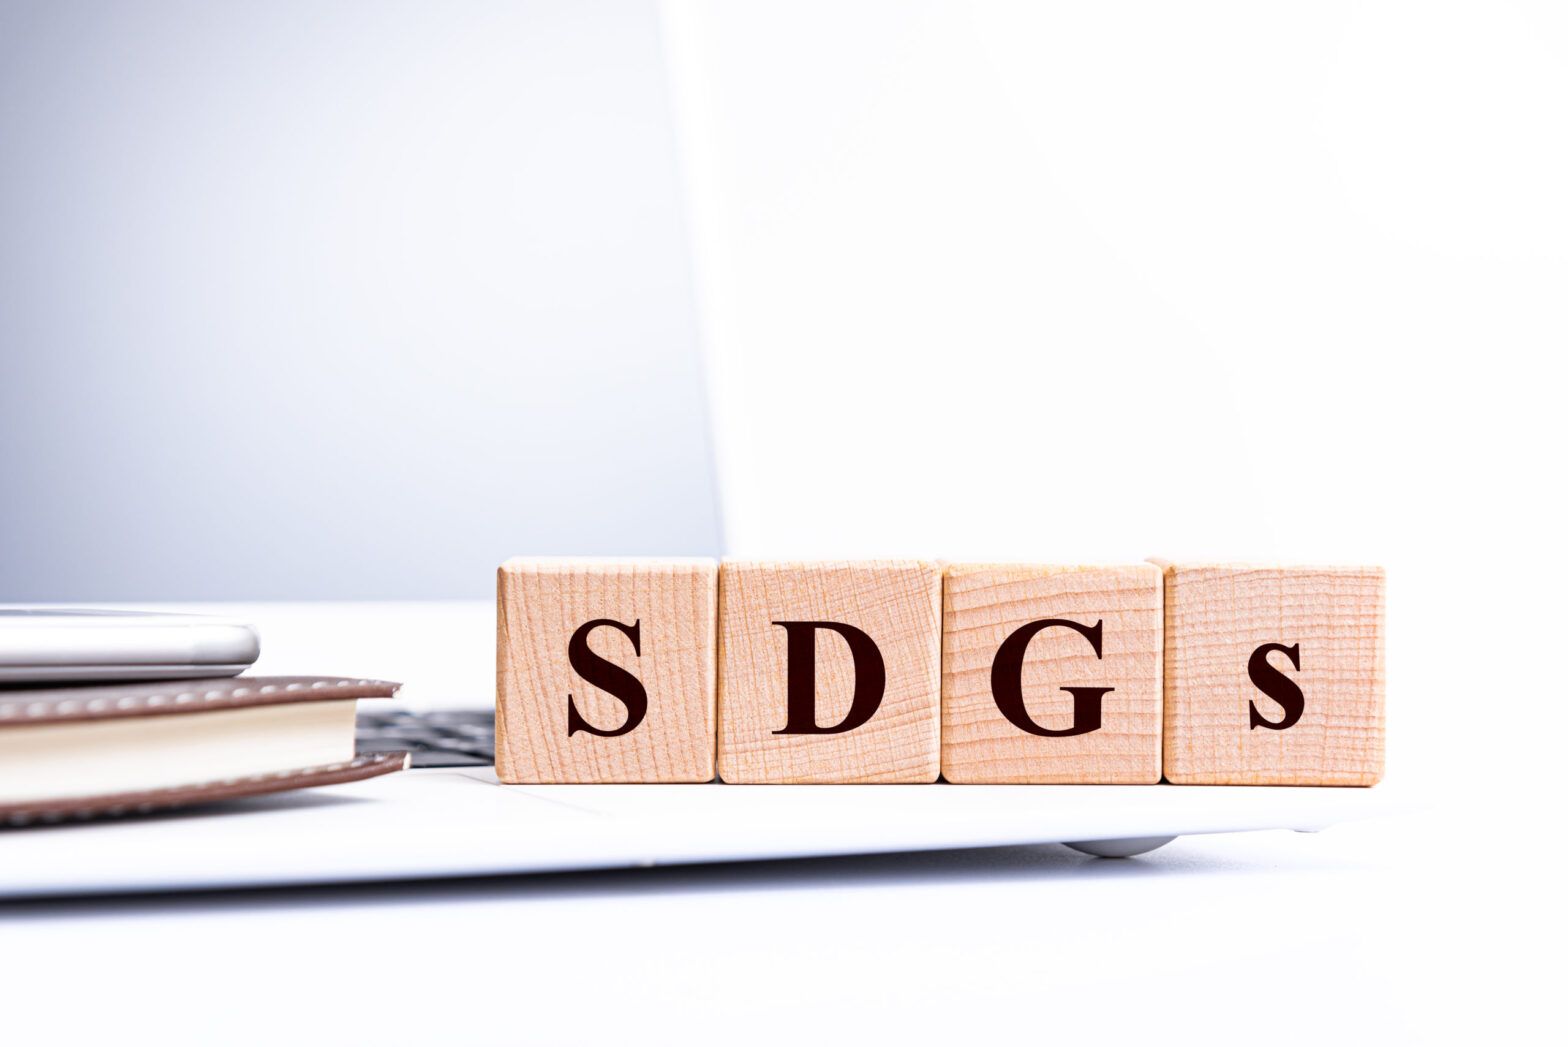 Almost every Stoxx 600 company negatively contributes to the SDGs